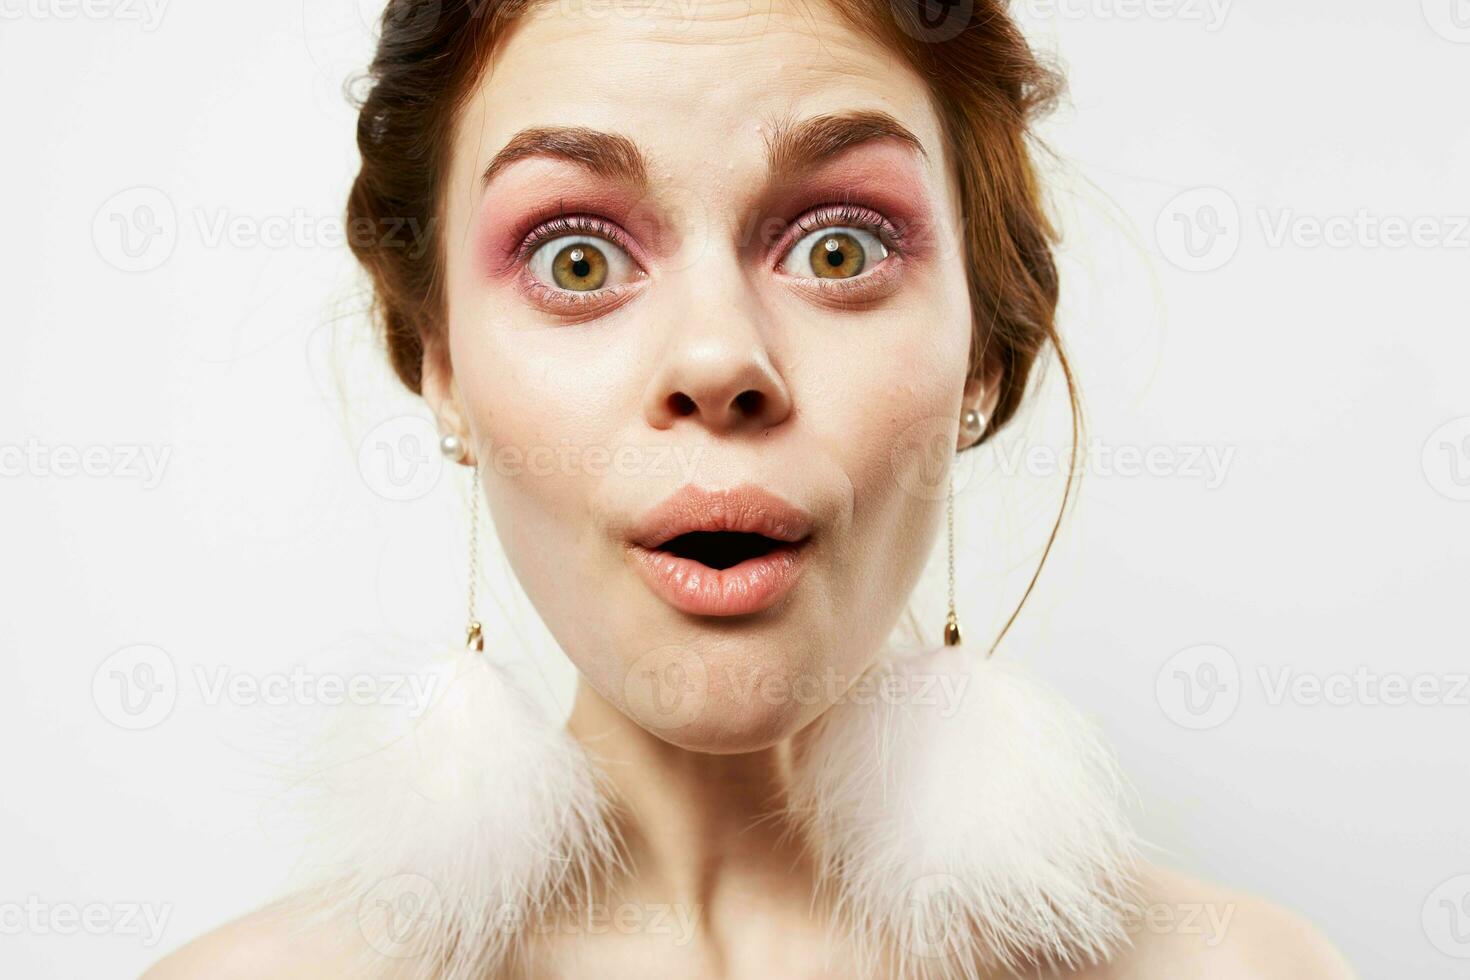 woman with fluffy earrings bright makeup emotions close-up photo